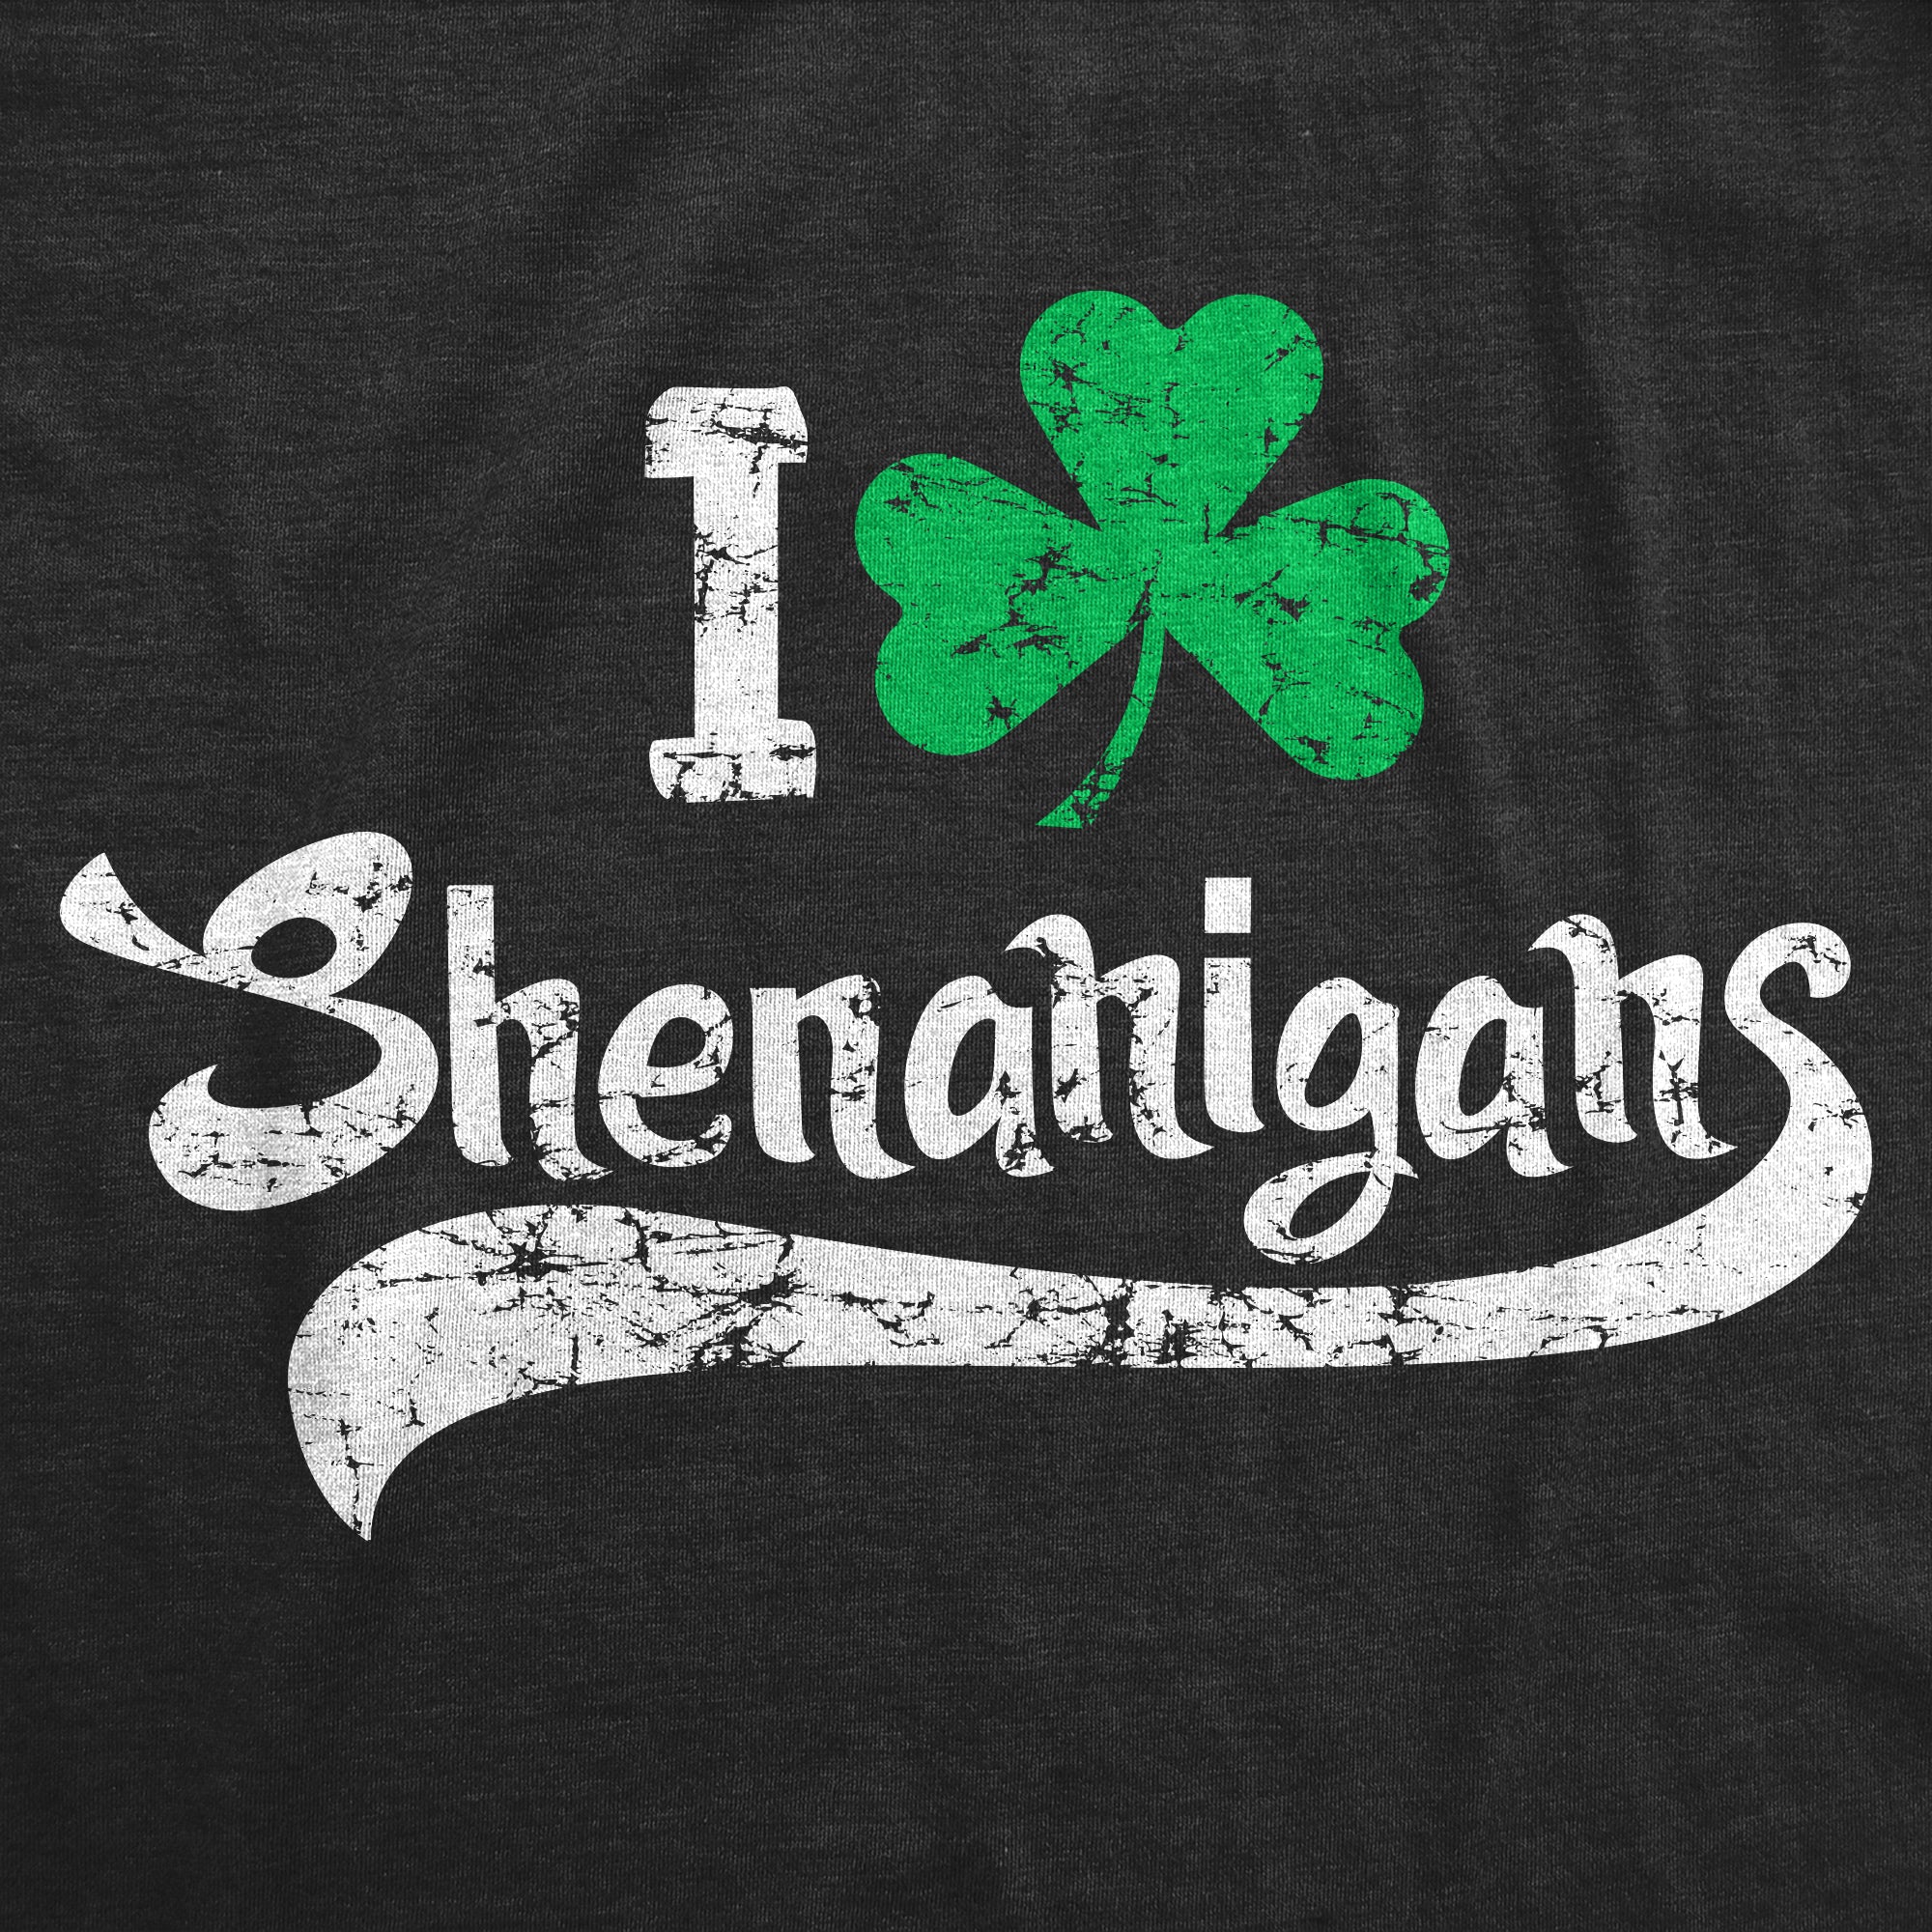 Funny Heather Black - Two Color Print I Clover Shenanigans Mens T Shirt Nerdy Saint Patrick's Day Drinking Tee